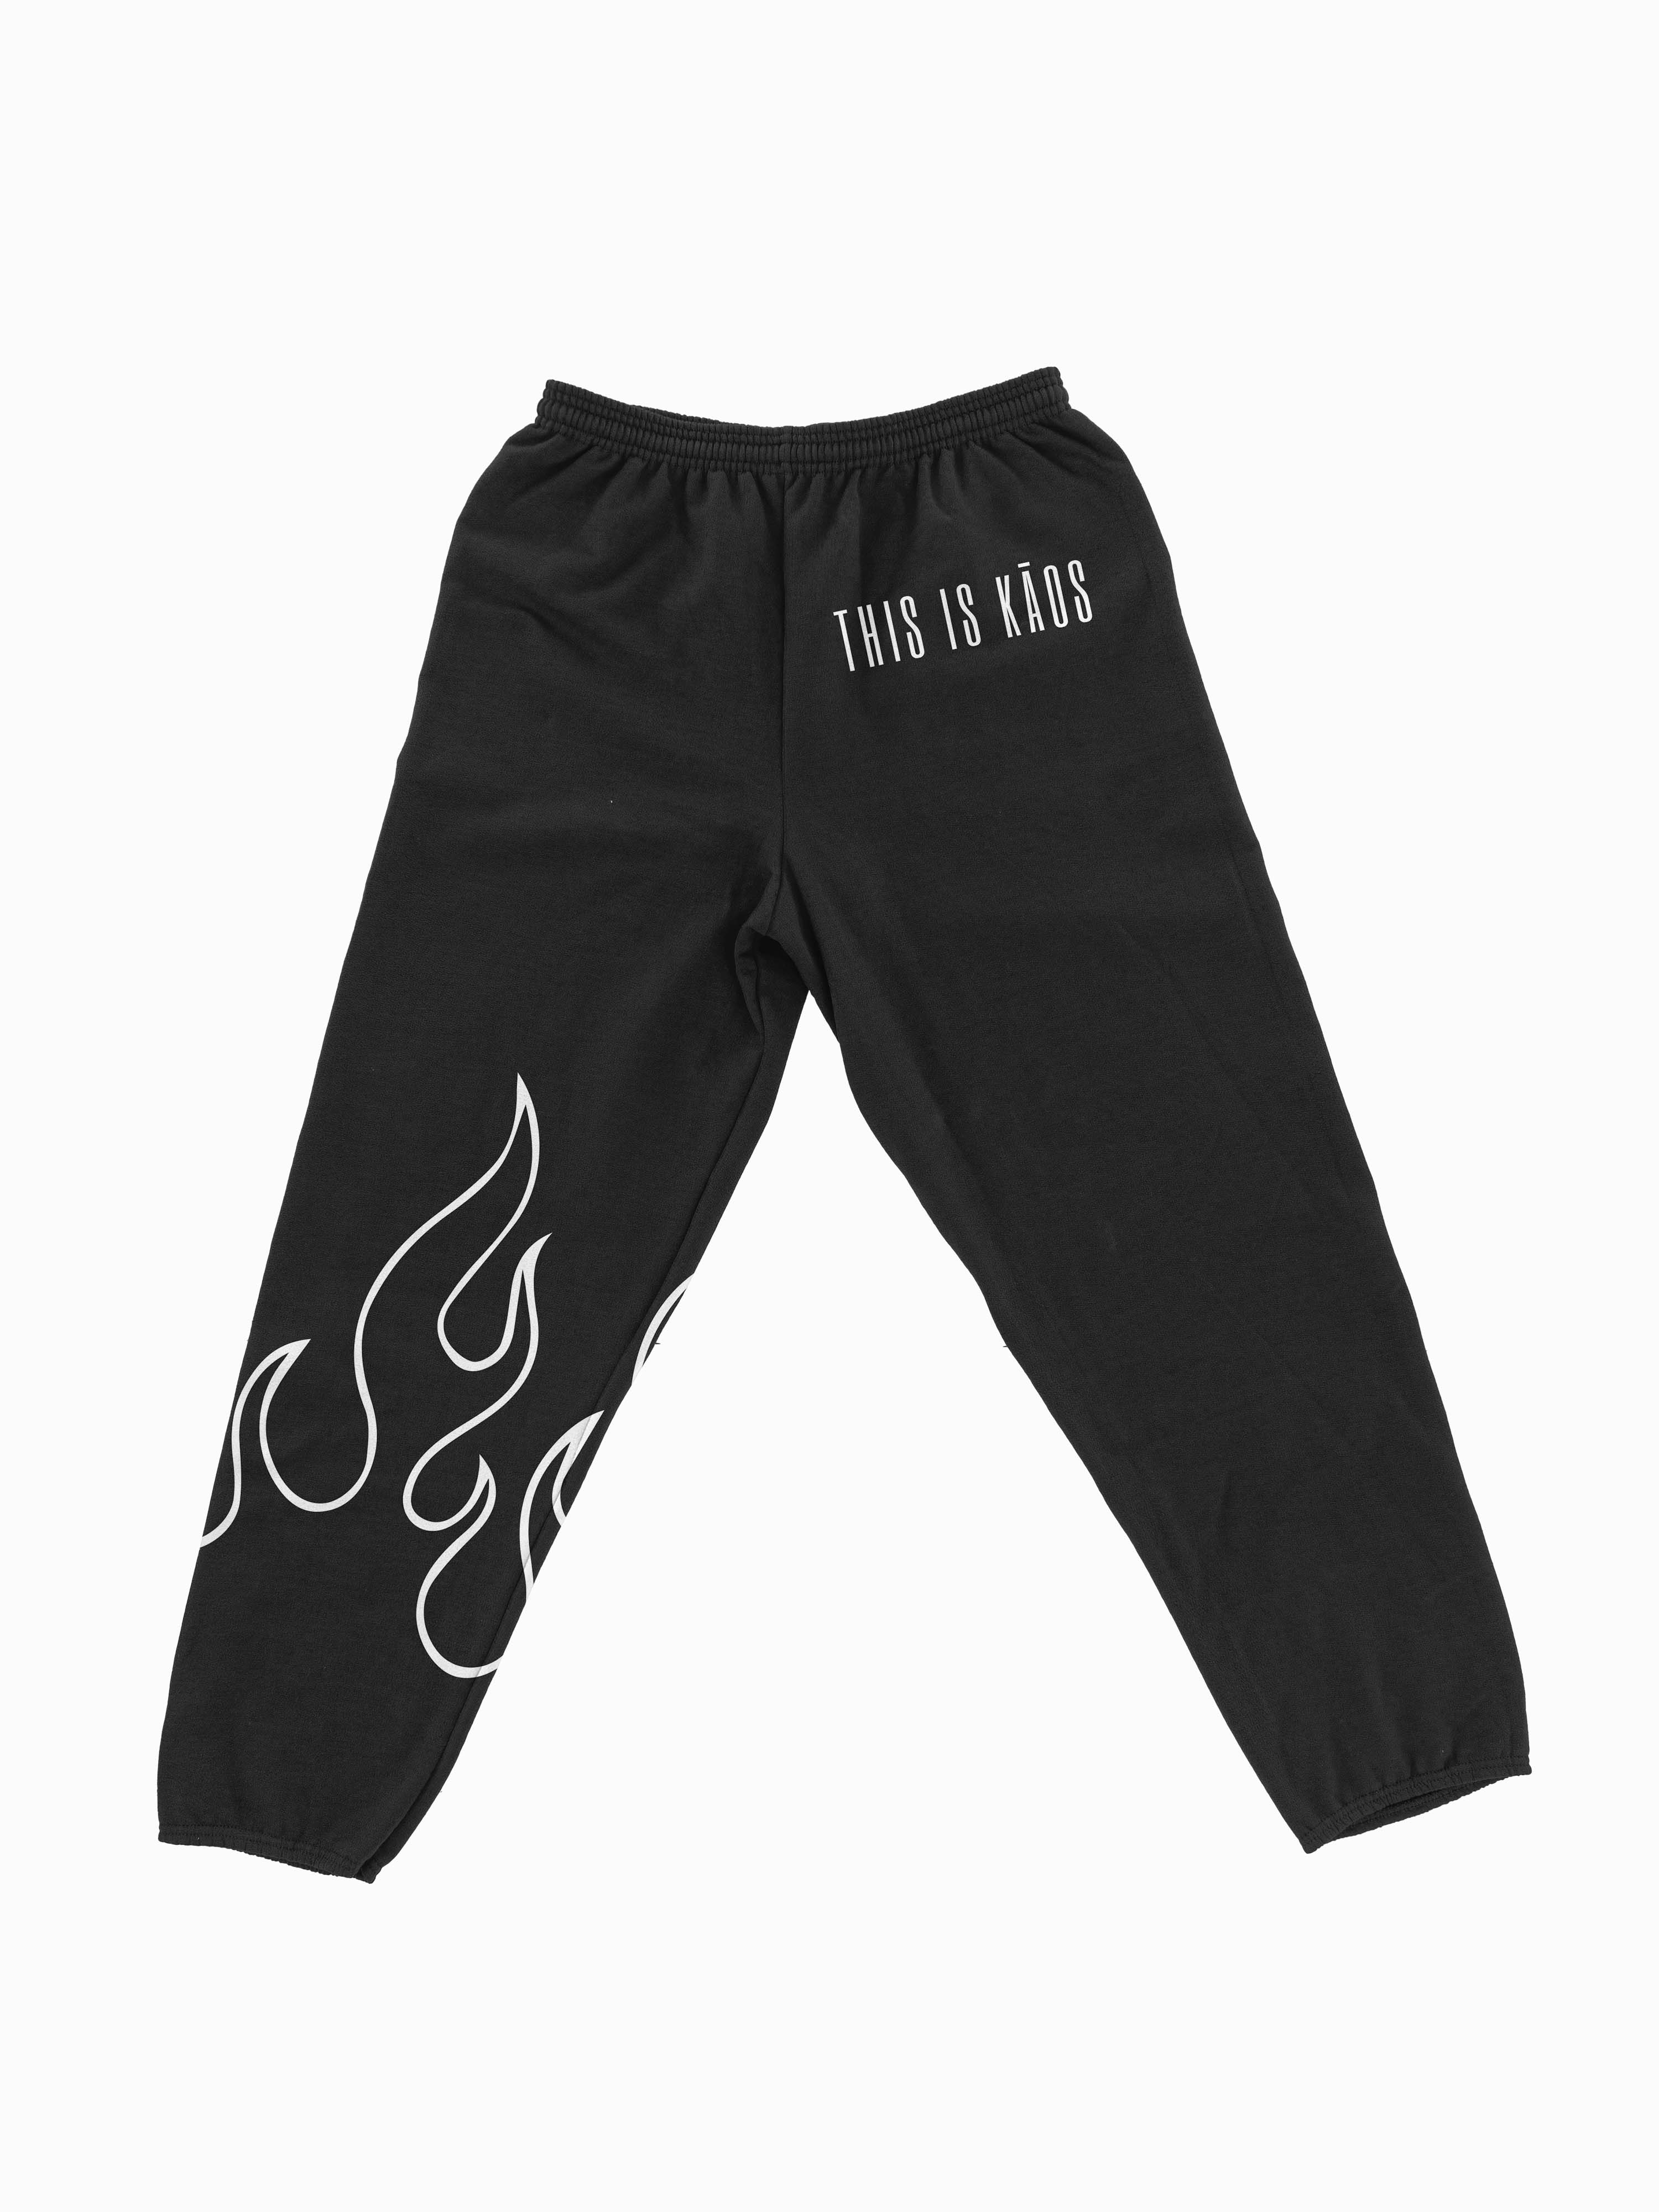 Black Flame Sweats – This Is Kāos